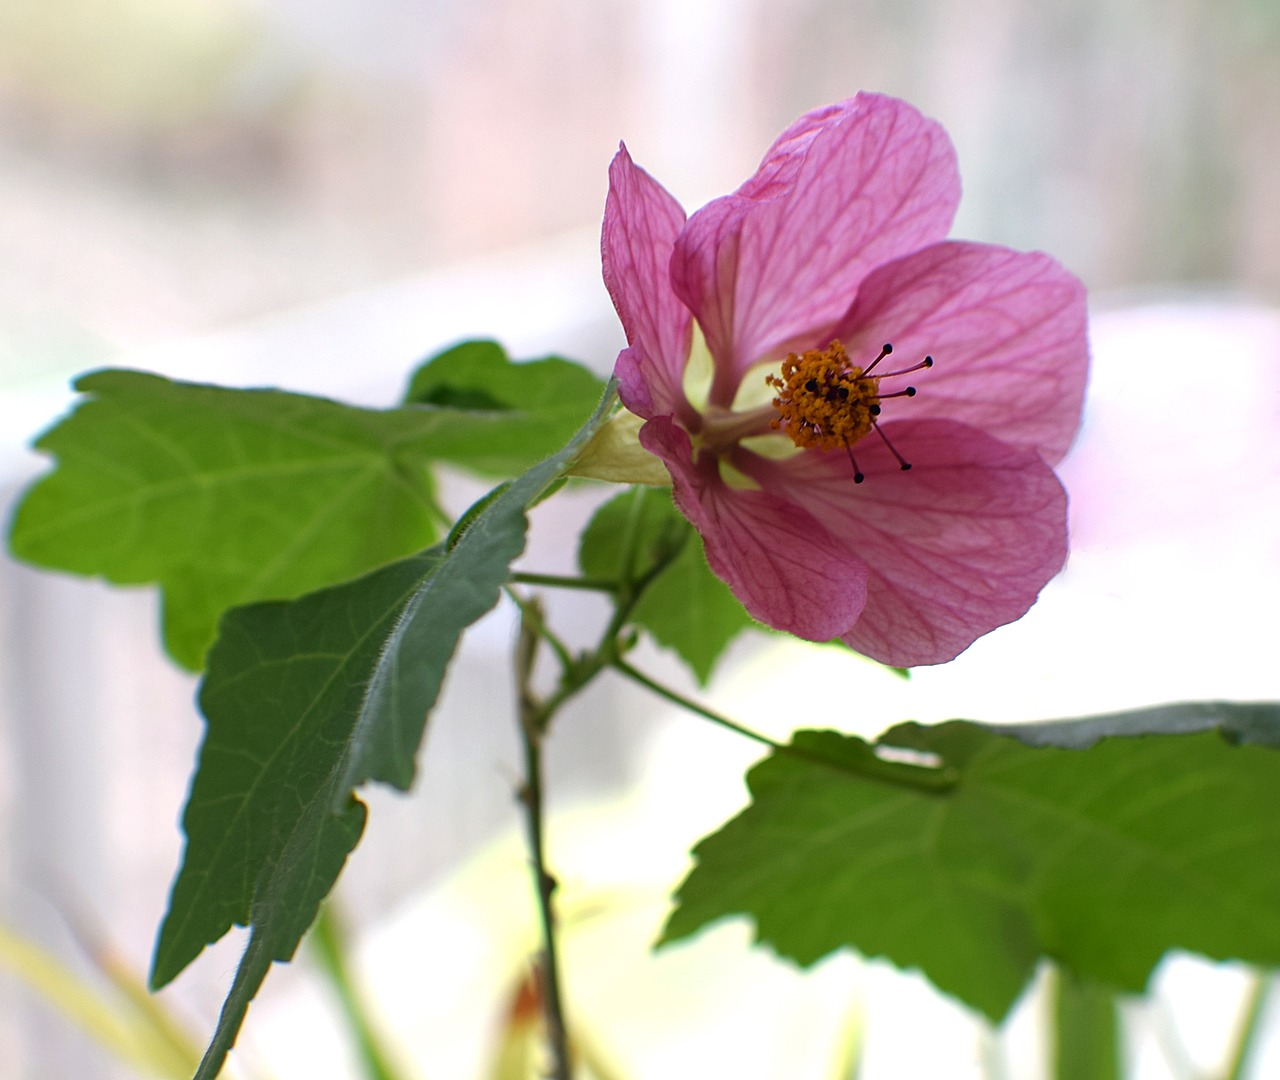 flowering maple container plant garden free photo